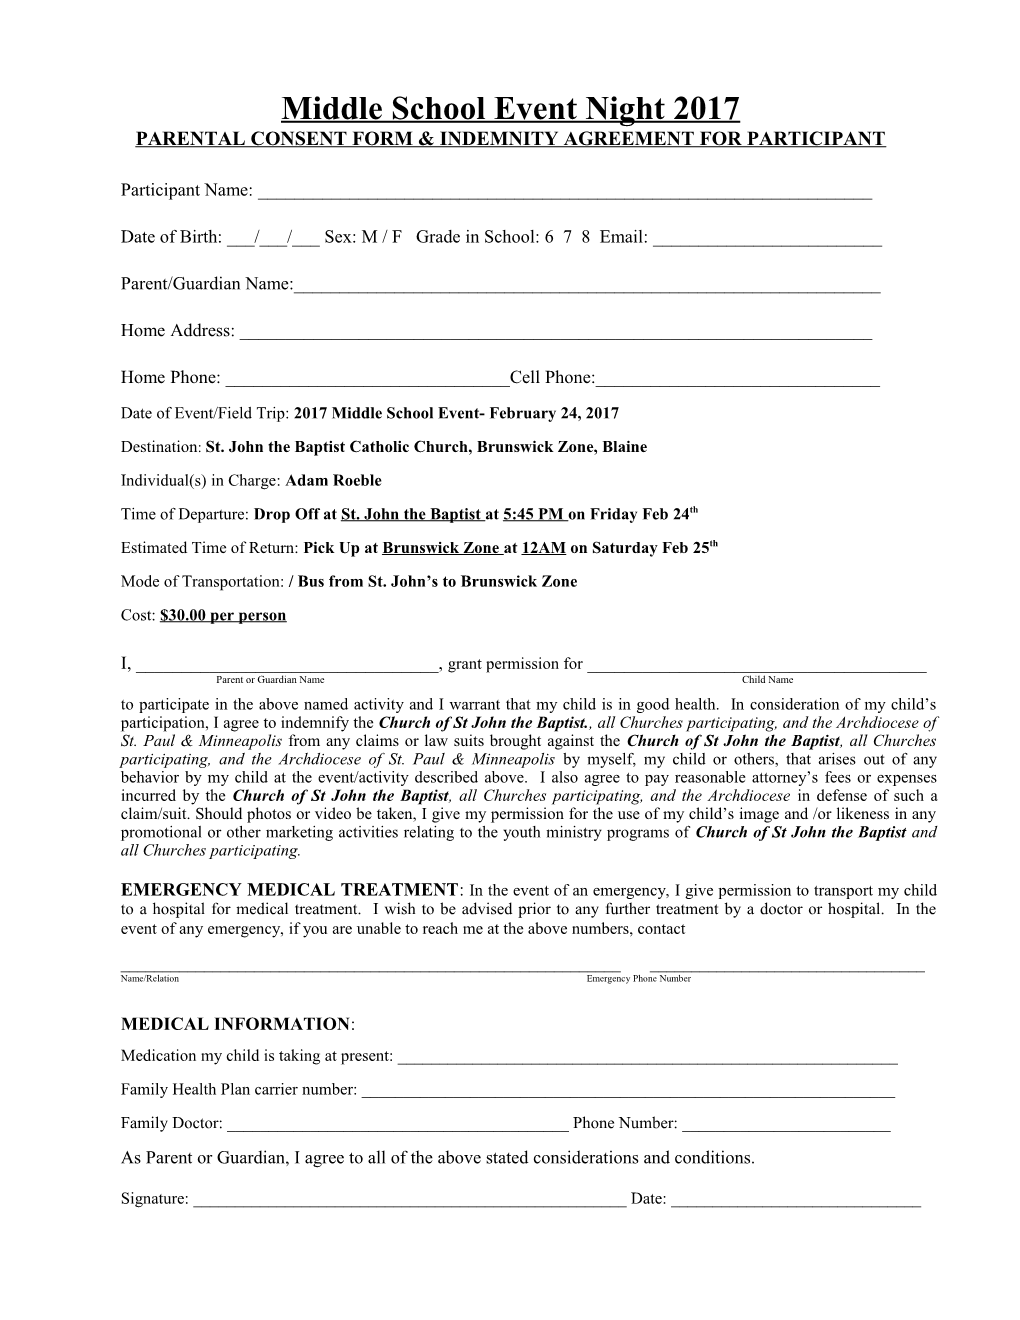 Parental Consent Form & Indemnity Agreement for Participant